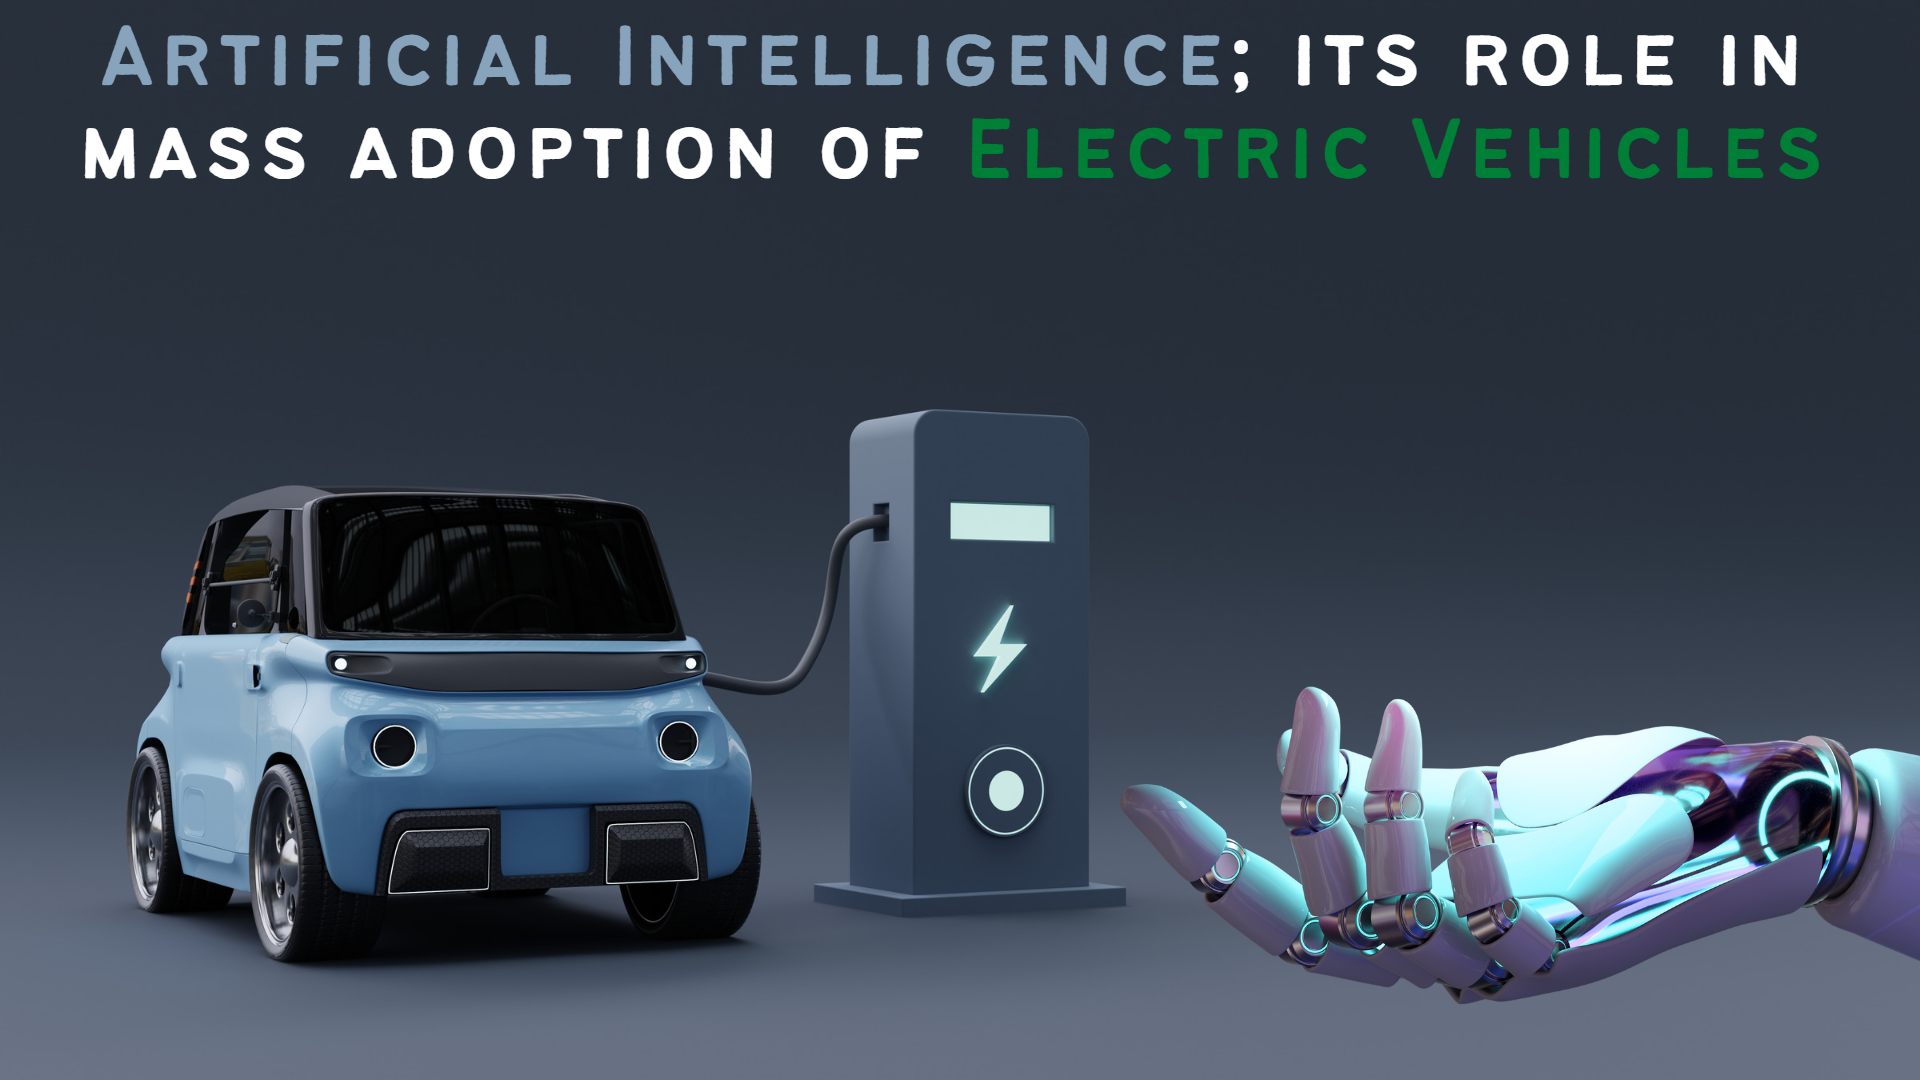 https://e-vehicleinfo.com/artificial-intelligence-its-role-in-mass-adoption-of-electric-vehicles/